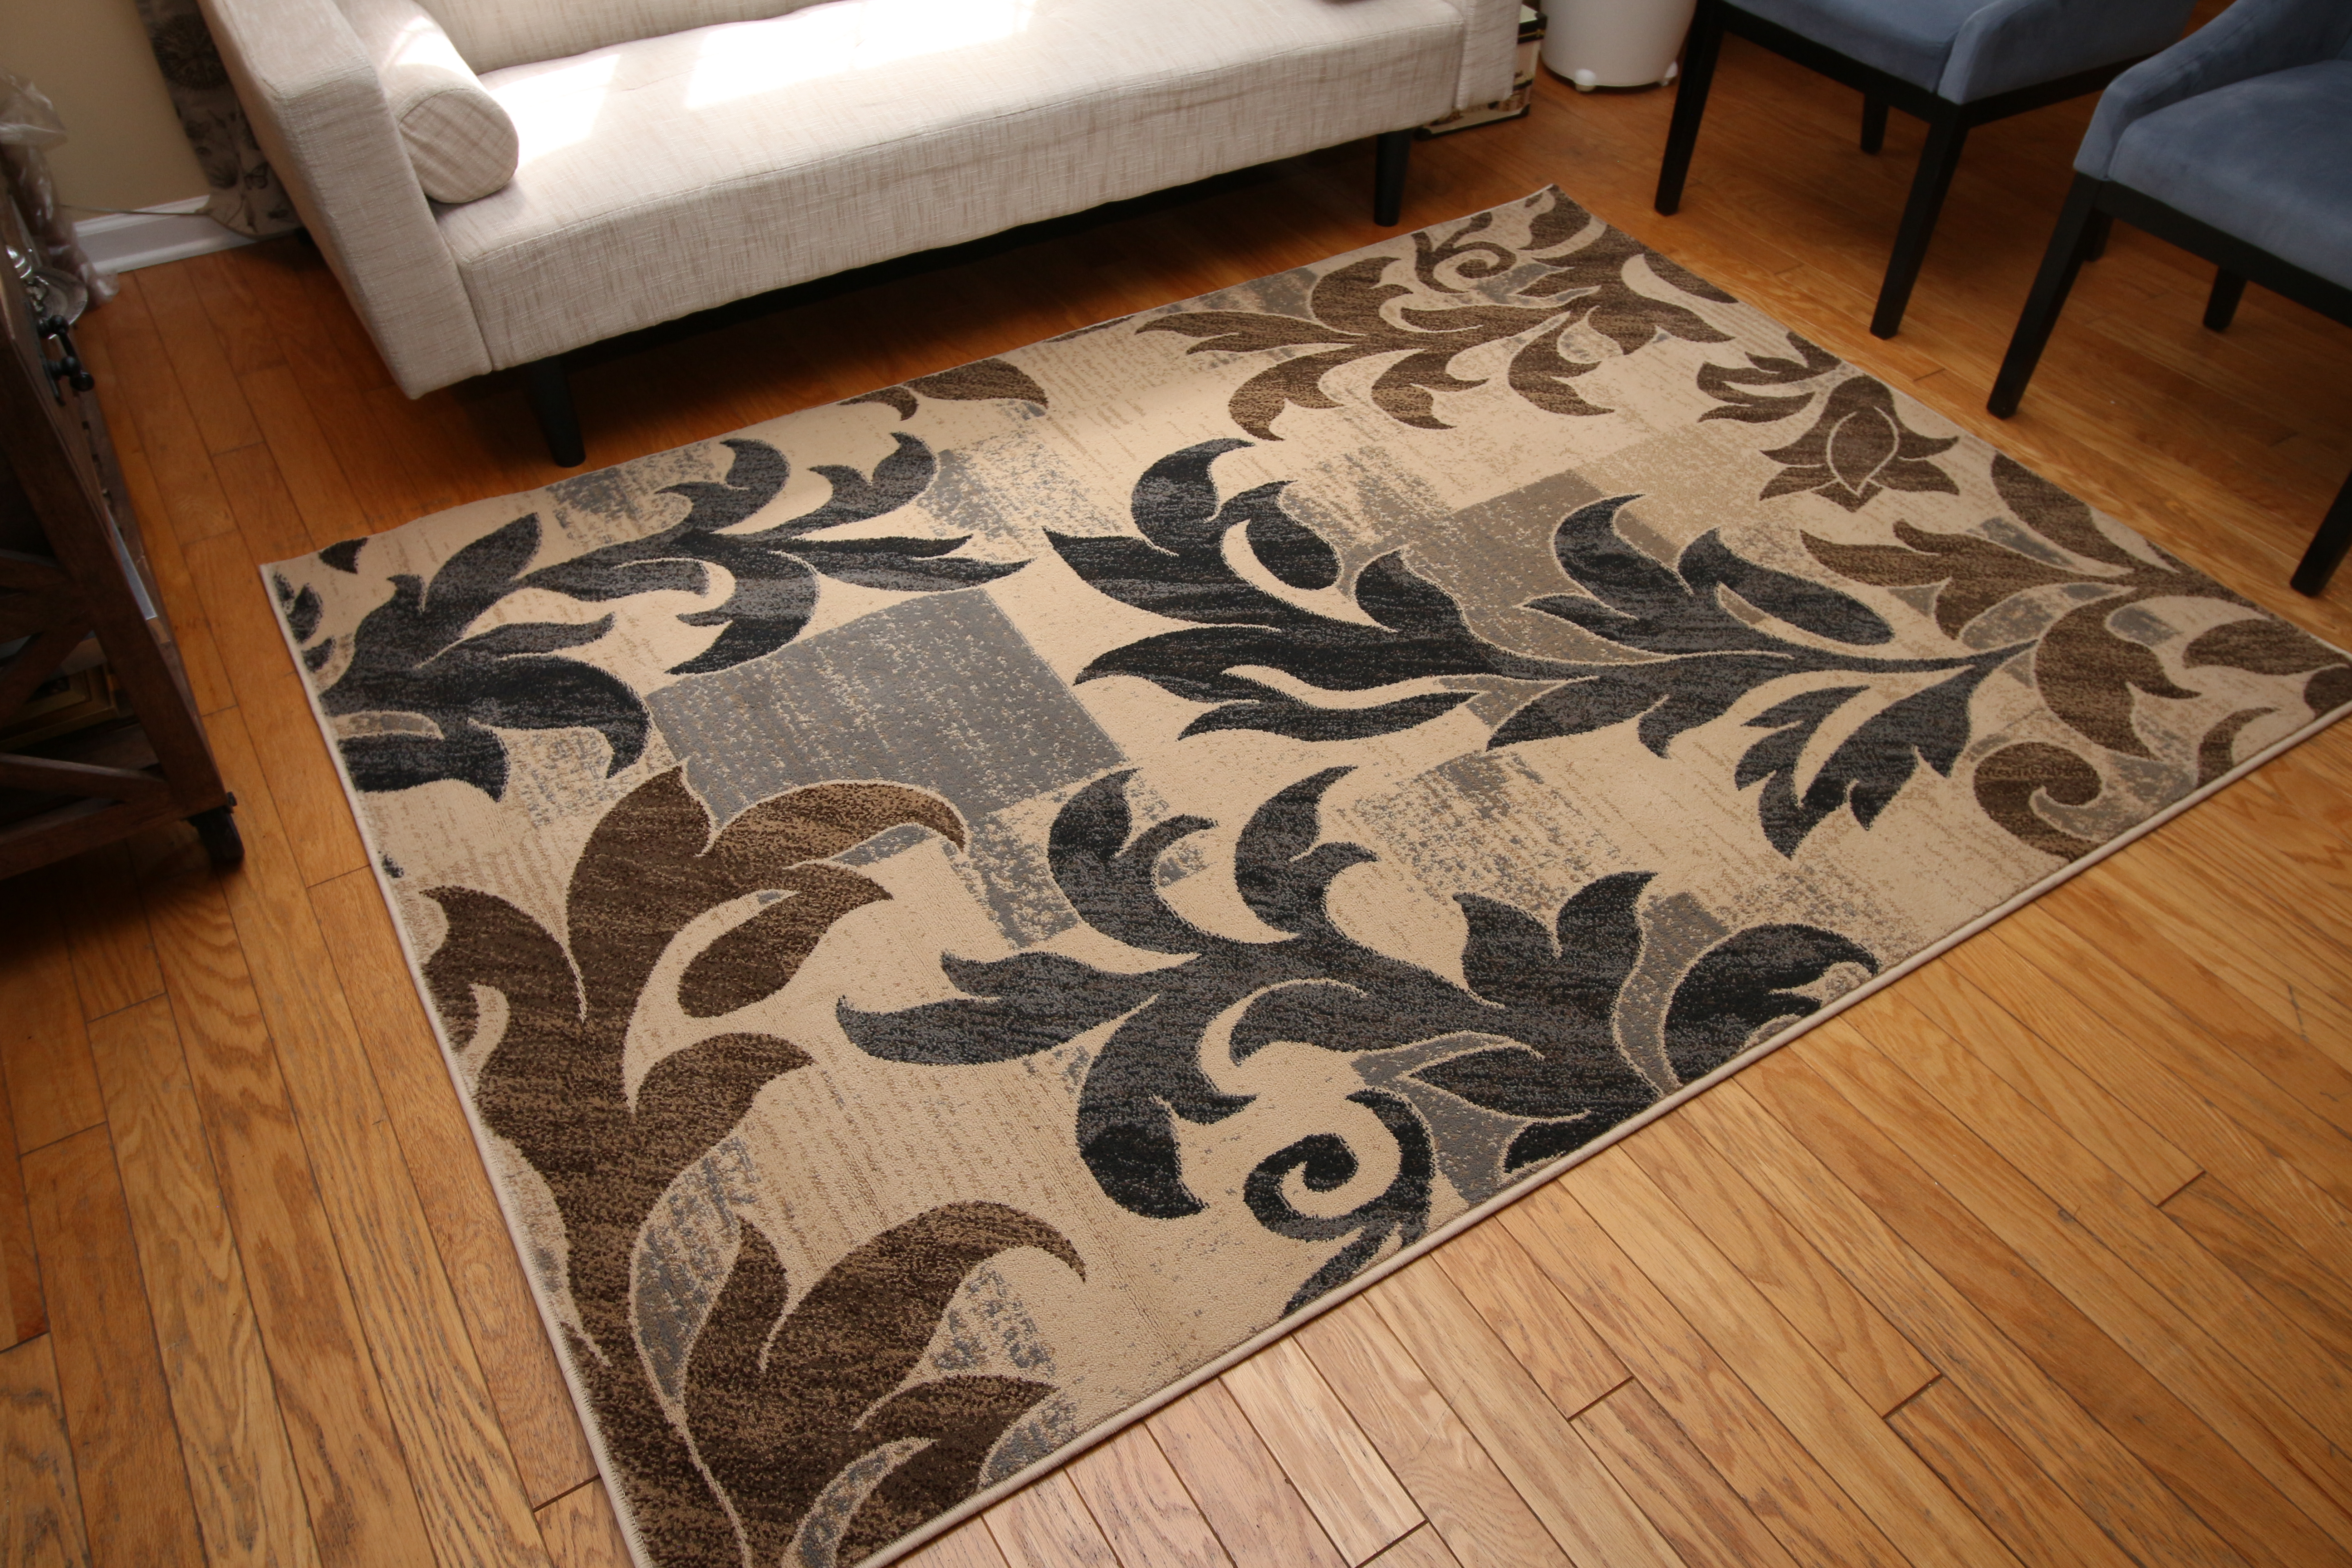 Handmade Area Rugs Woven Area Rug Collection Area Rugs Oriental